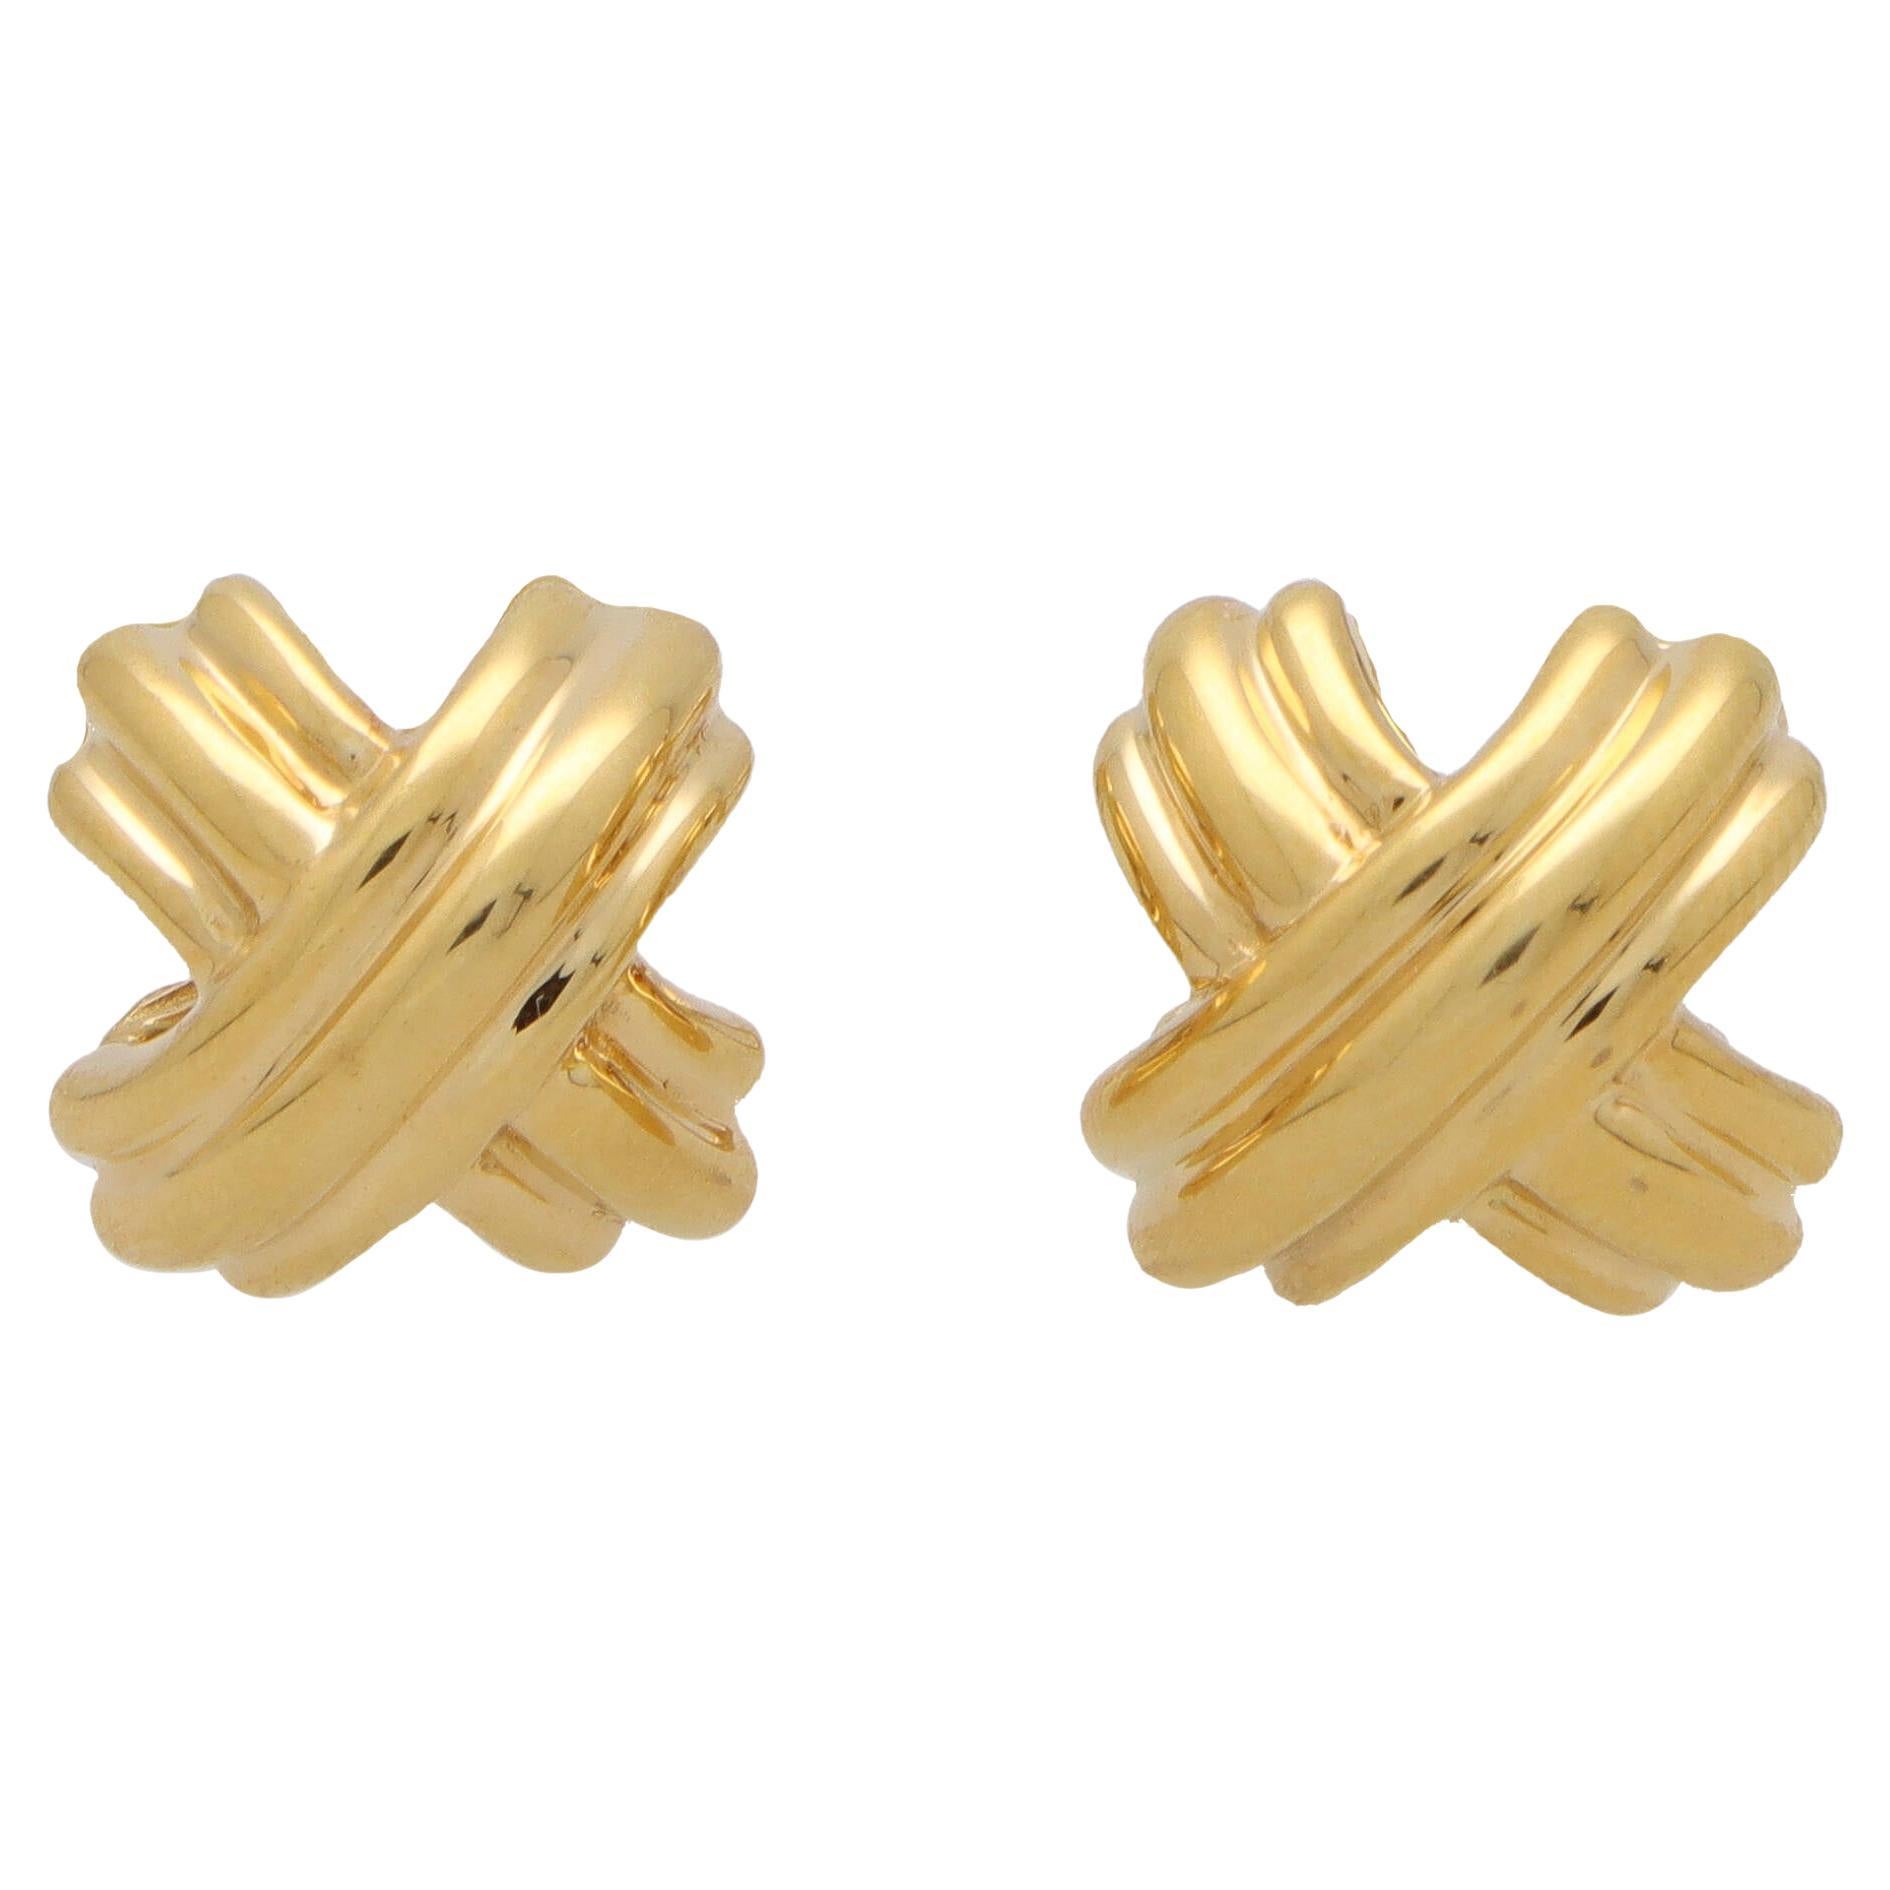  Vintage Tiffany & Co. Signature X Cross Earrings in 18k Yellow Gold For Sale